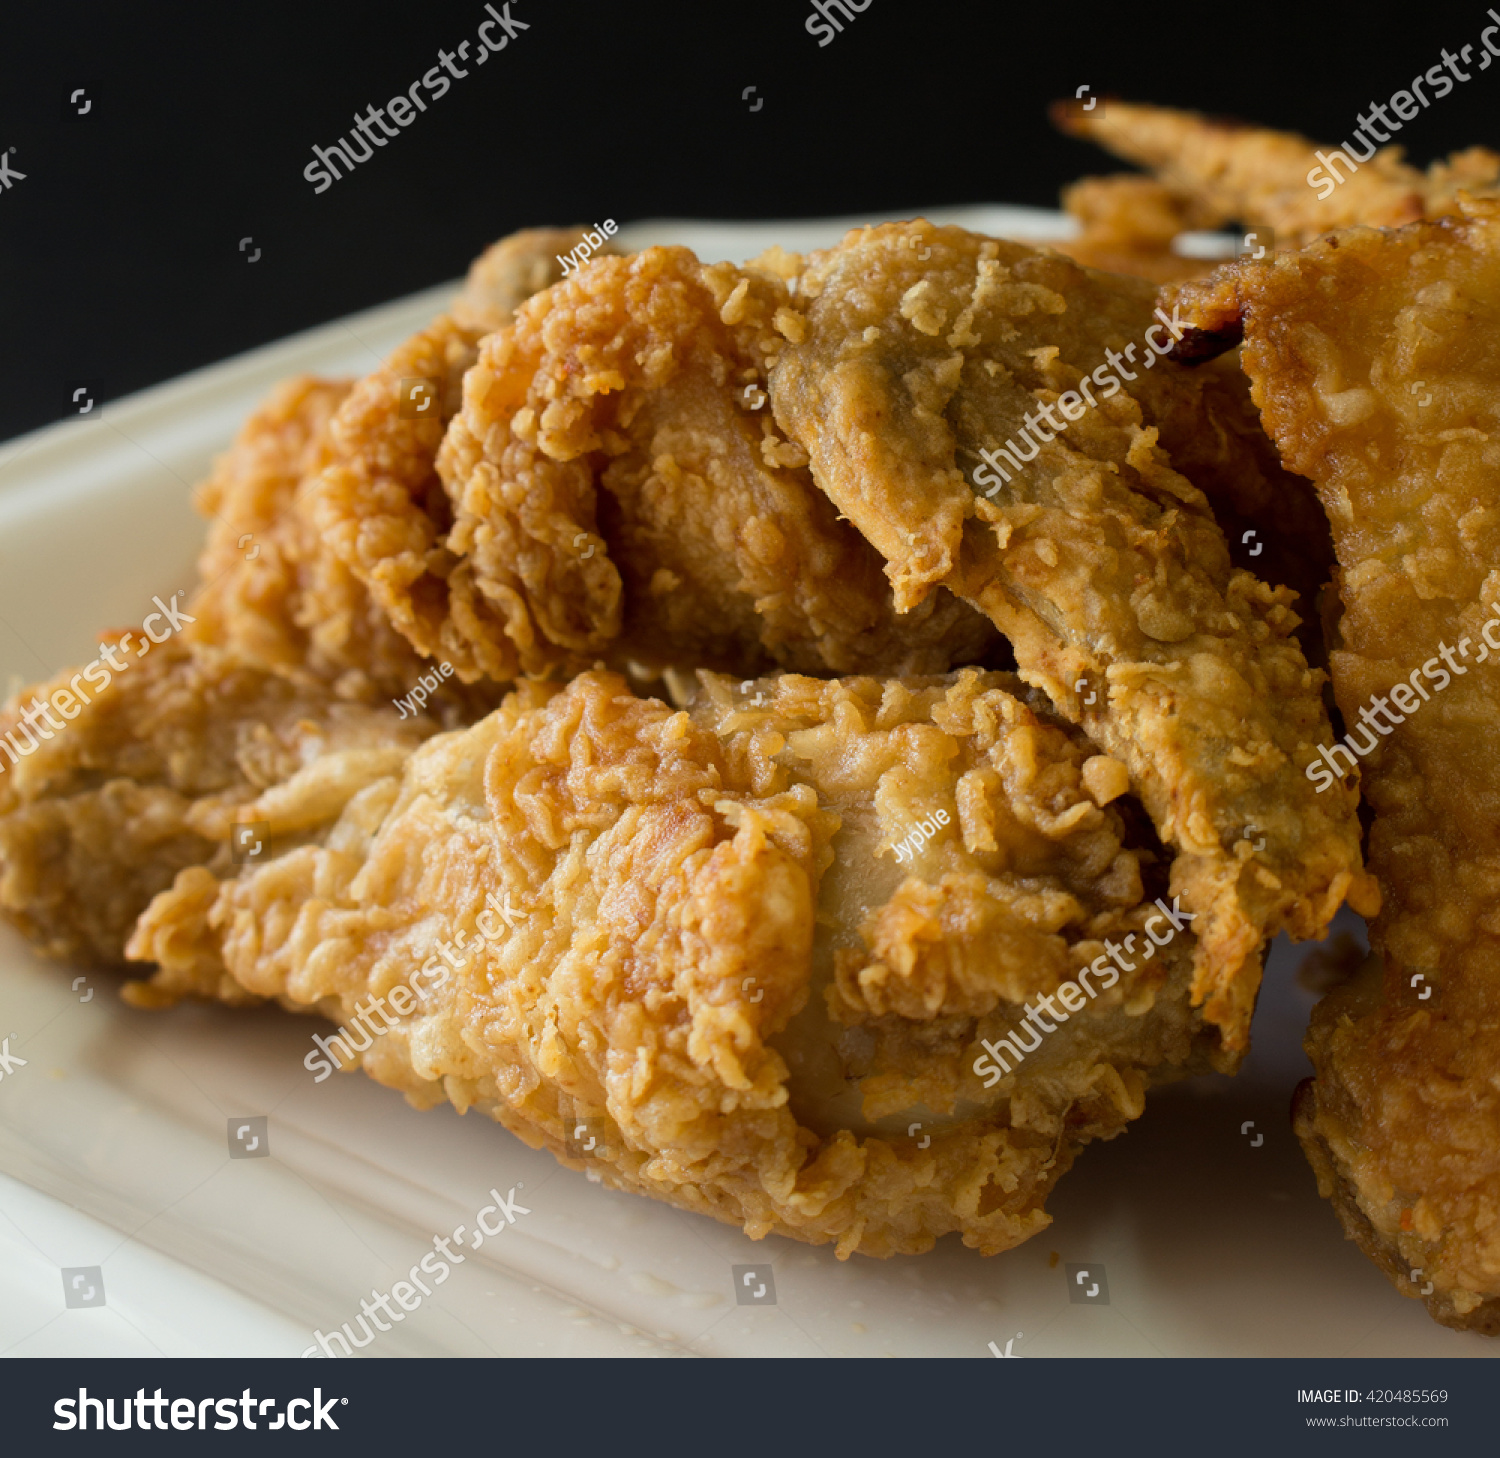 Fried Chicken On White Plate , Black Background Stock Photo 420485569